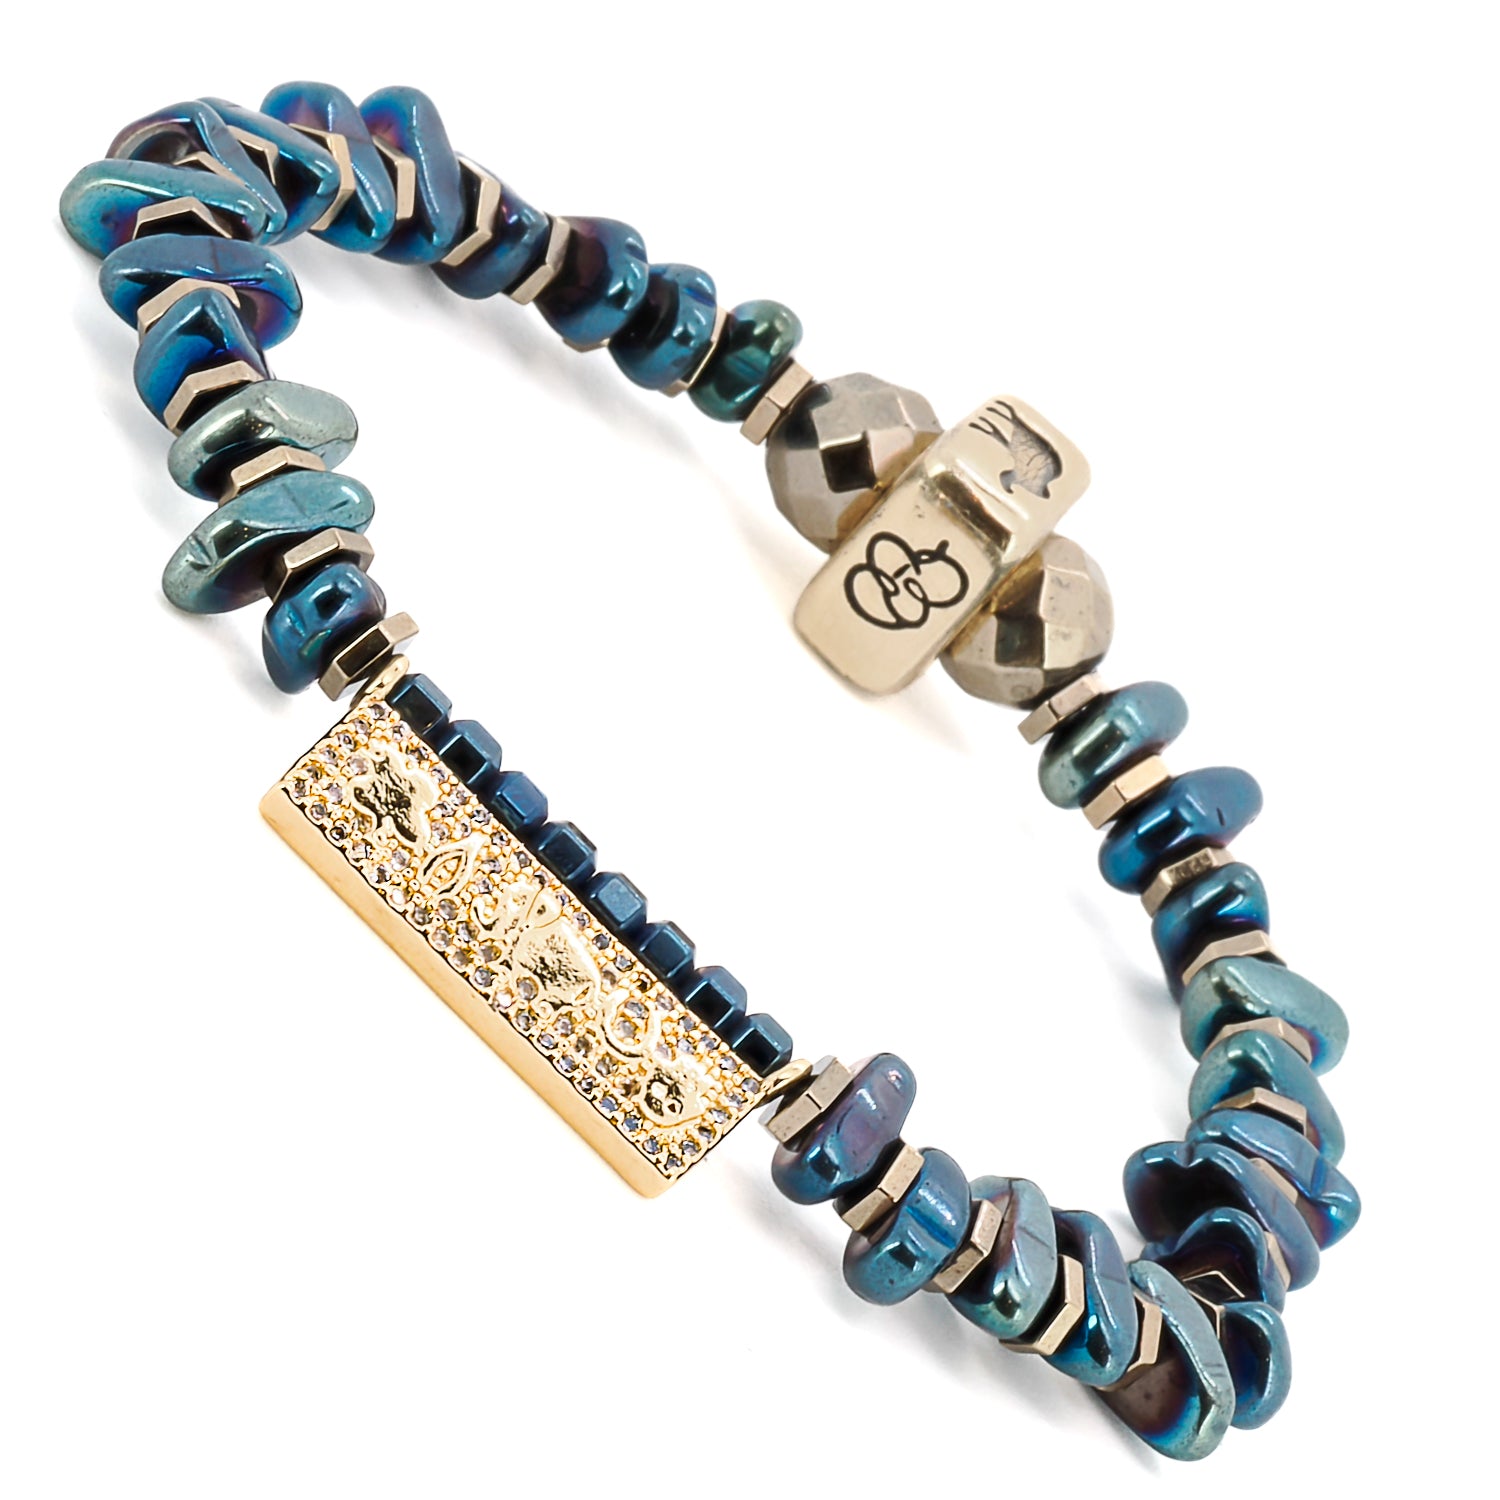 Add a touch of meaningful symbolism to your style with the Protection &amp; Luck Blue Hematite Bracelet, a powerful accessory for daily wear.